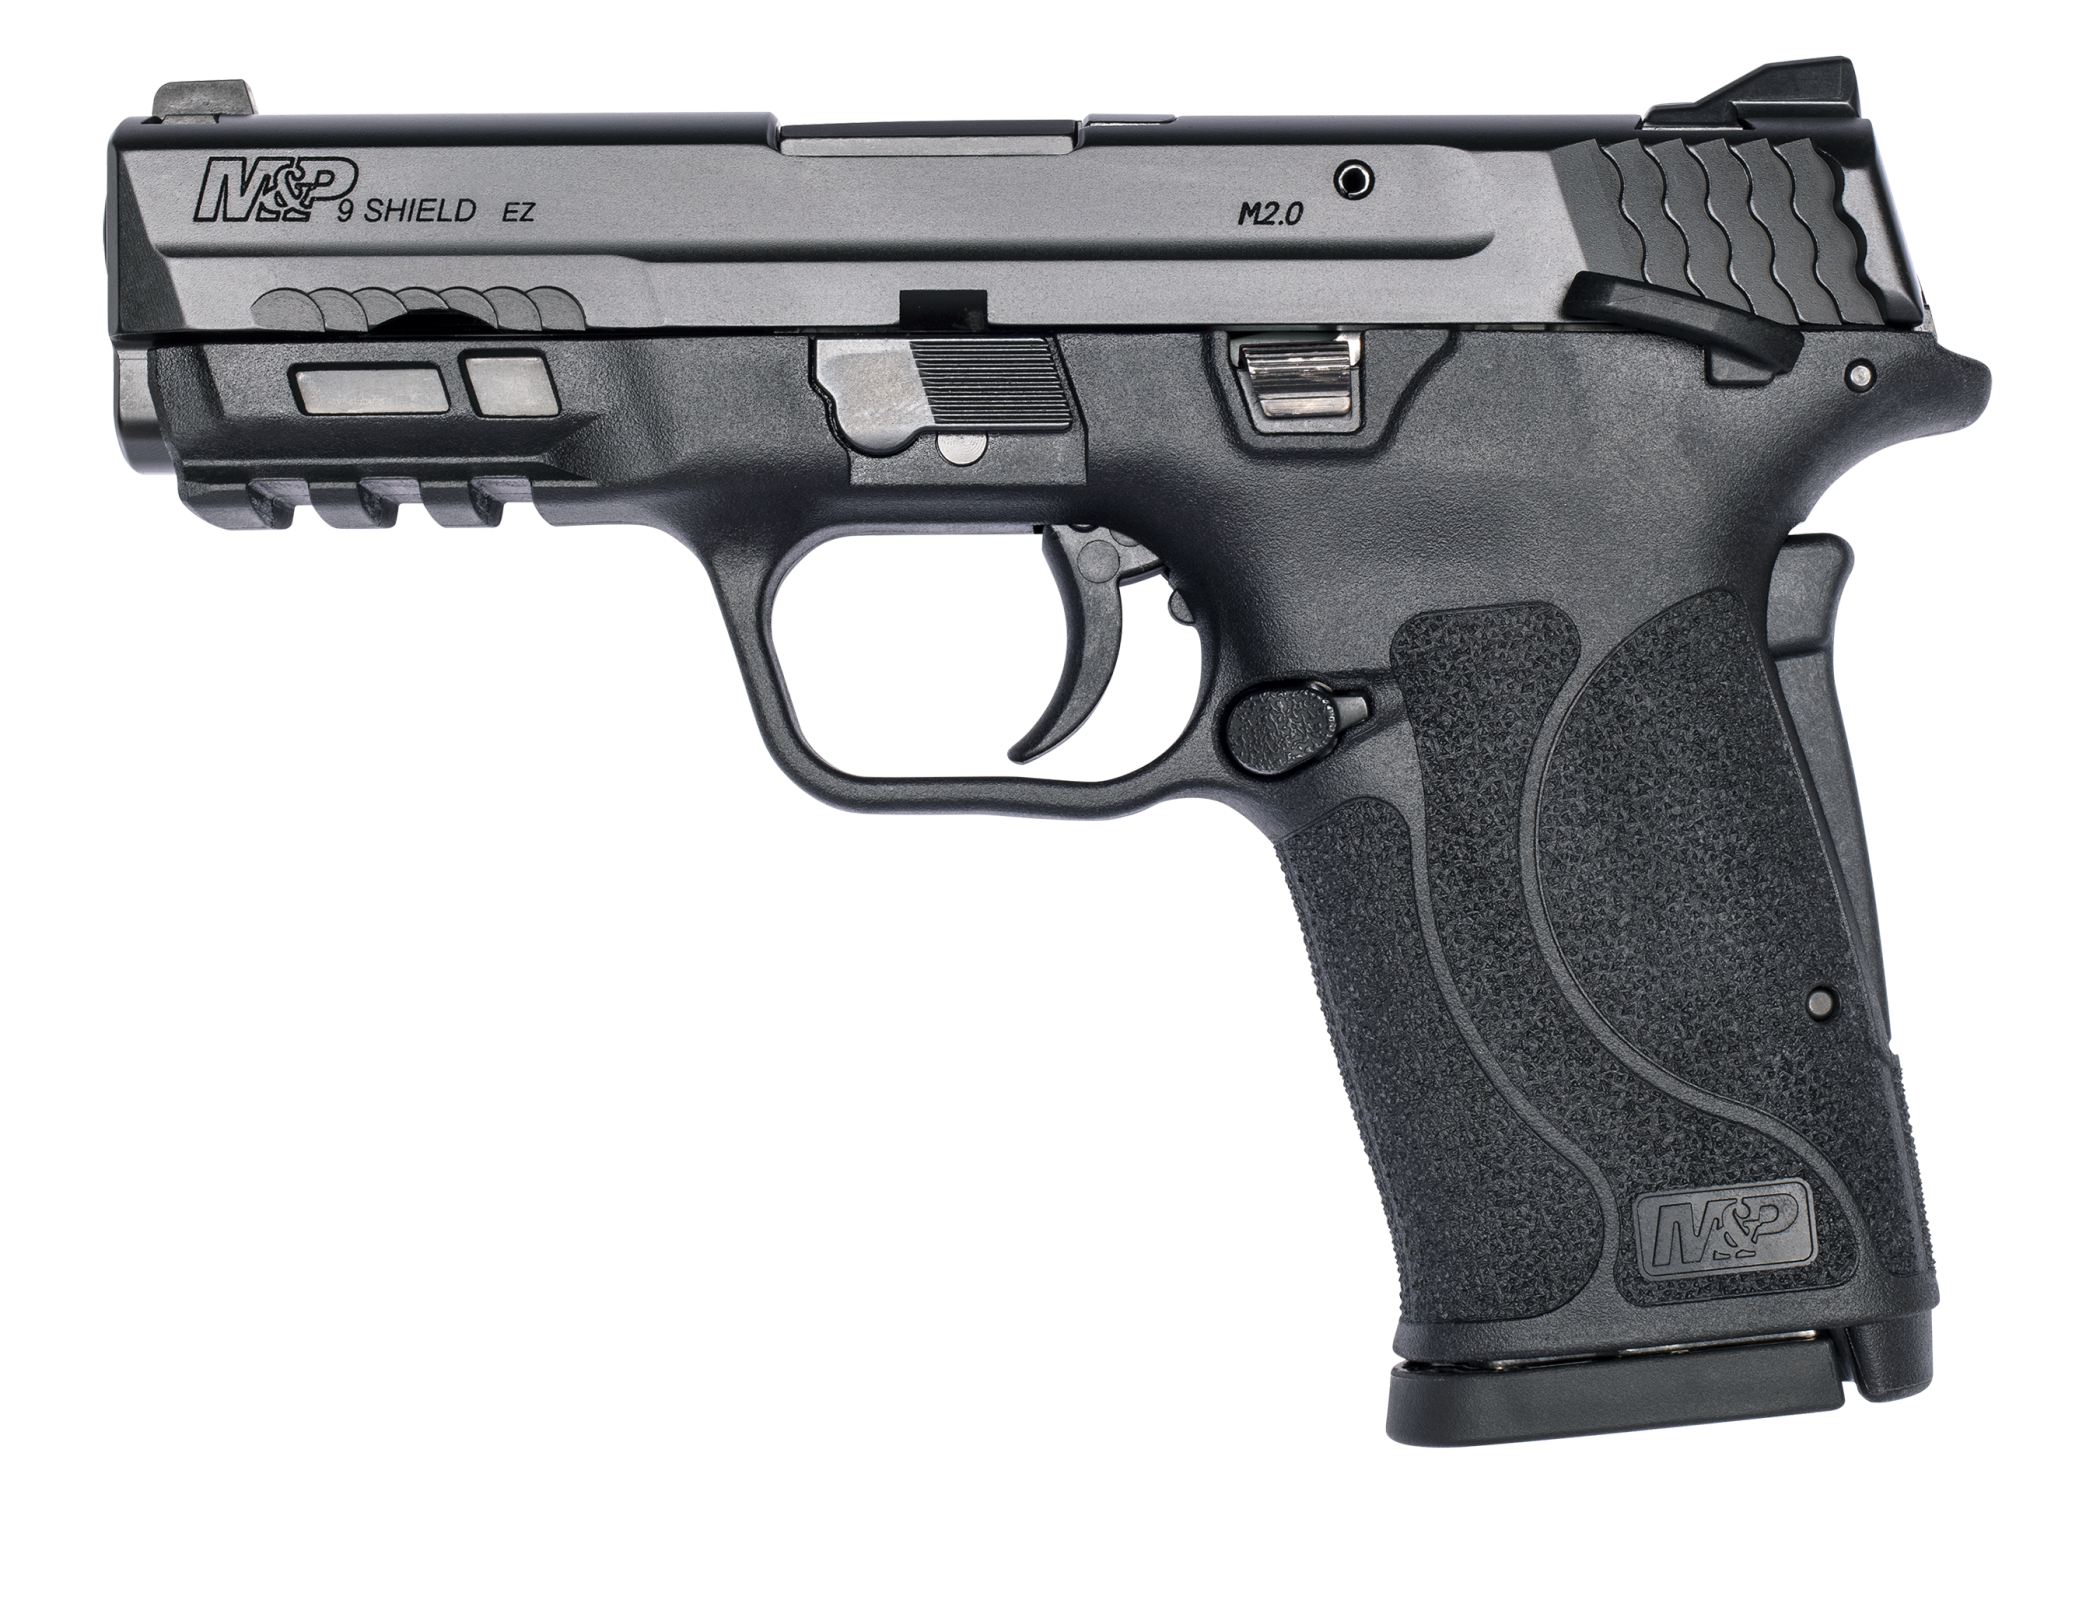 https://cityarsenal.com/product/smith-wesson-mp9-shield-ez-9mm-pistol-black-with-thumb-safety/